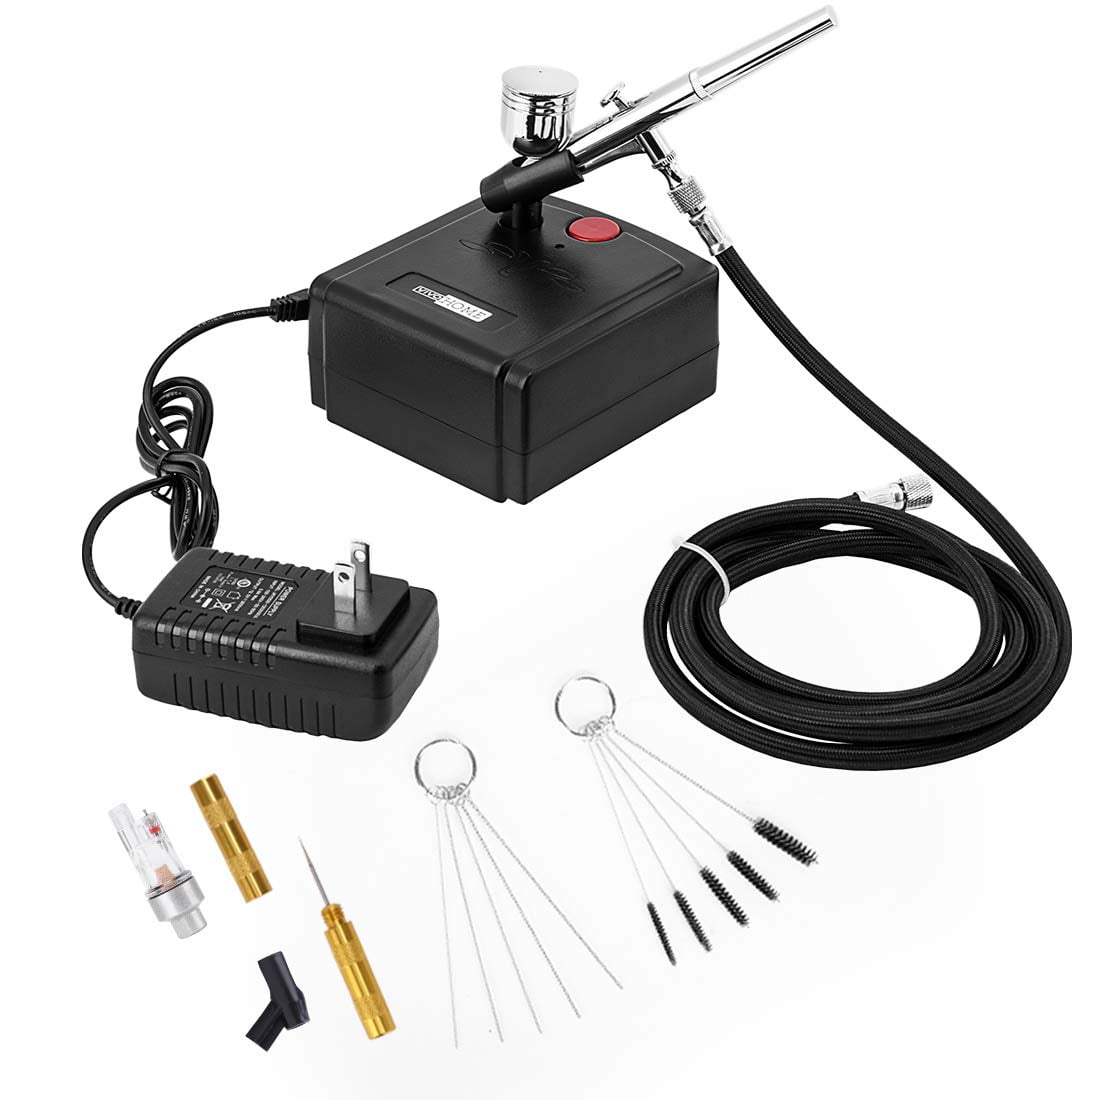 Eurobuy Portable Airbrush Kit Color Painting Air Pump Set with Compressor Mini Airbrush Single Action Siphon Feed Airbrush for Painting Model Makeup